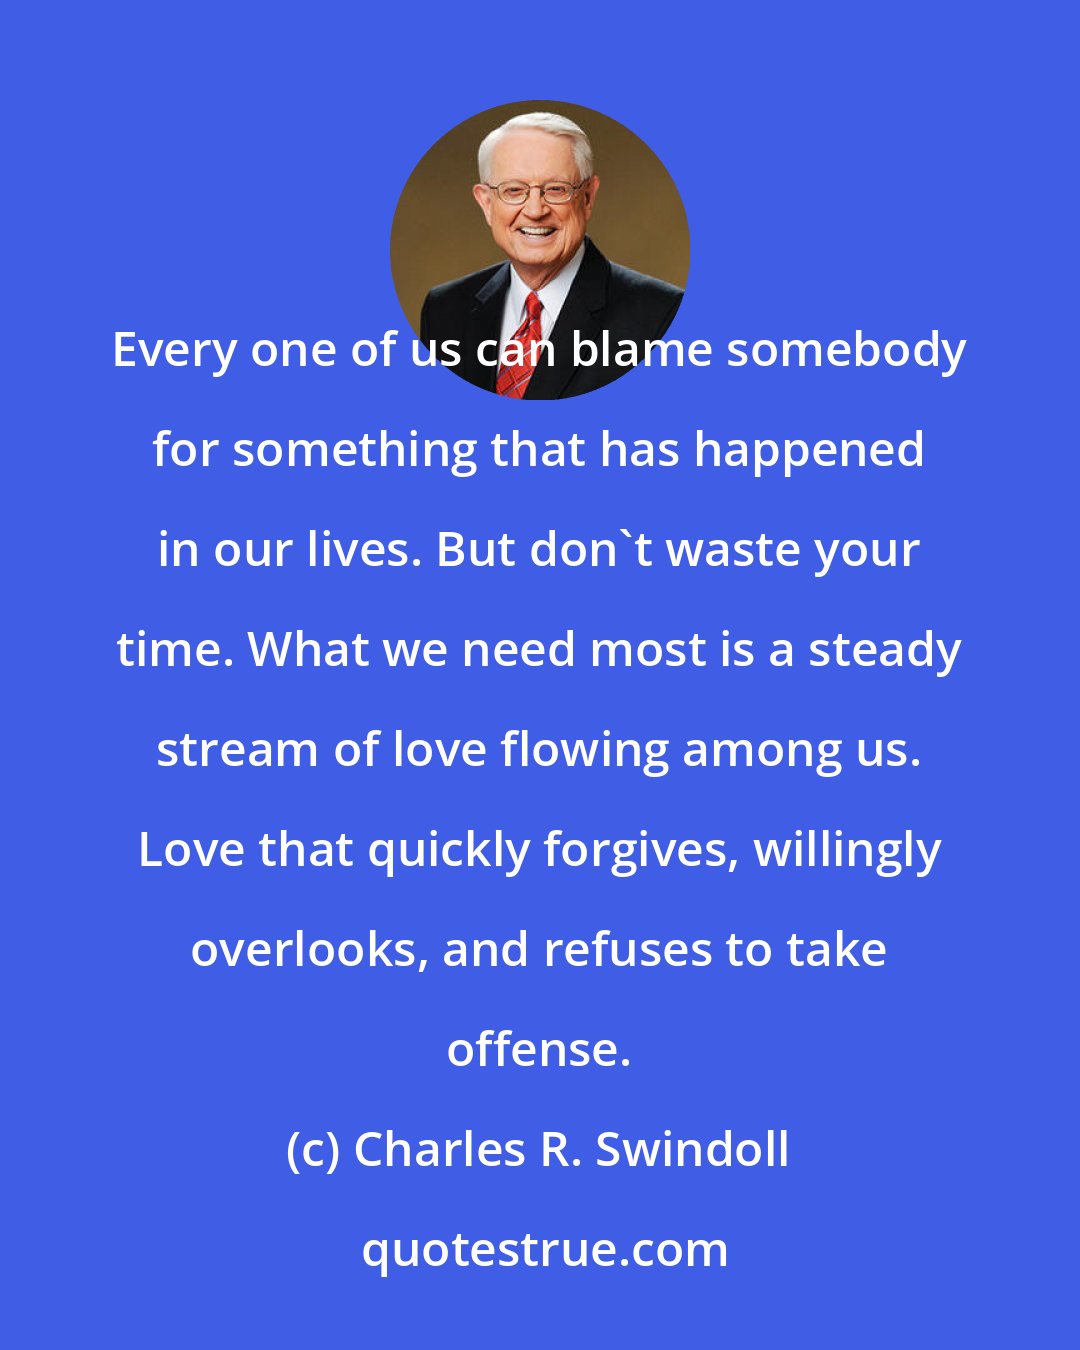 Charles R. Swindoll: Every one of us can blame somebody for something that has happened in our lives. But don't waste your time. What we need most is a steady stream of love flowing among us. Love that quickly forgives, willingly overlooks, and refuses to take offense.